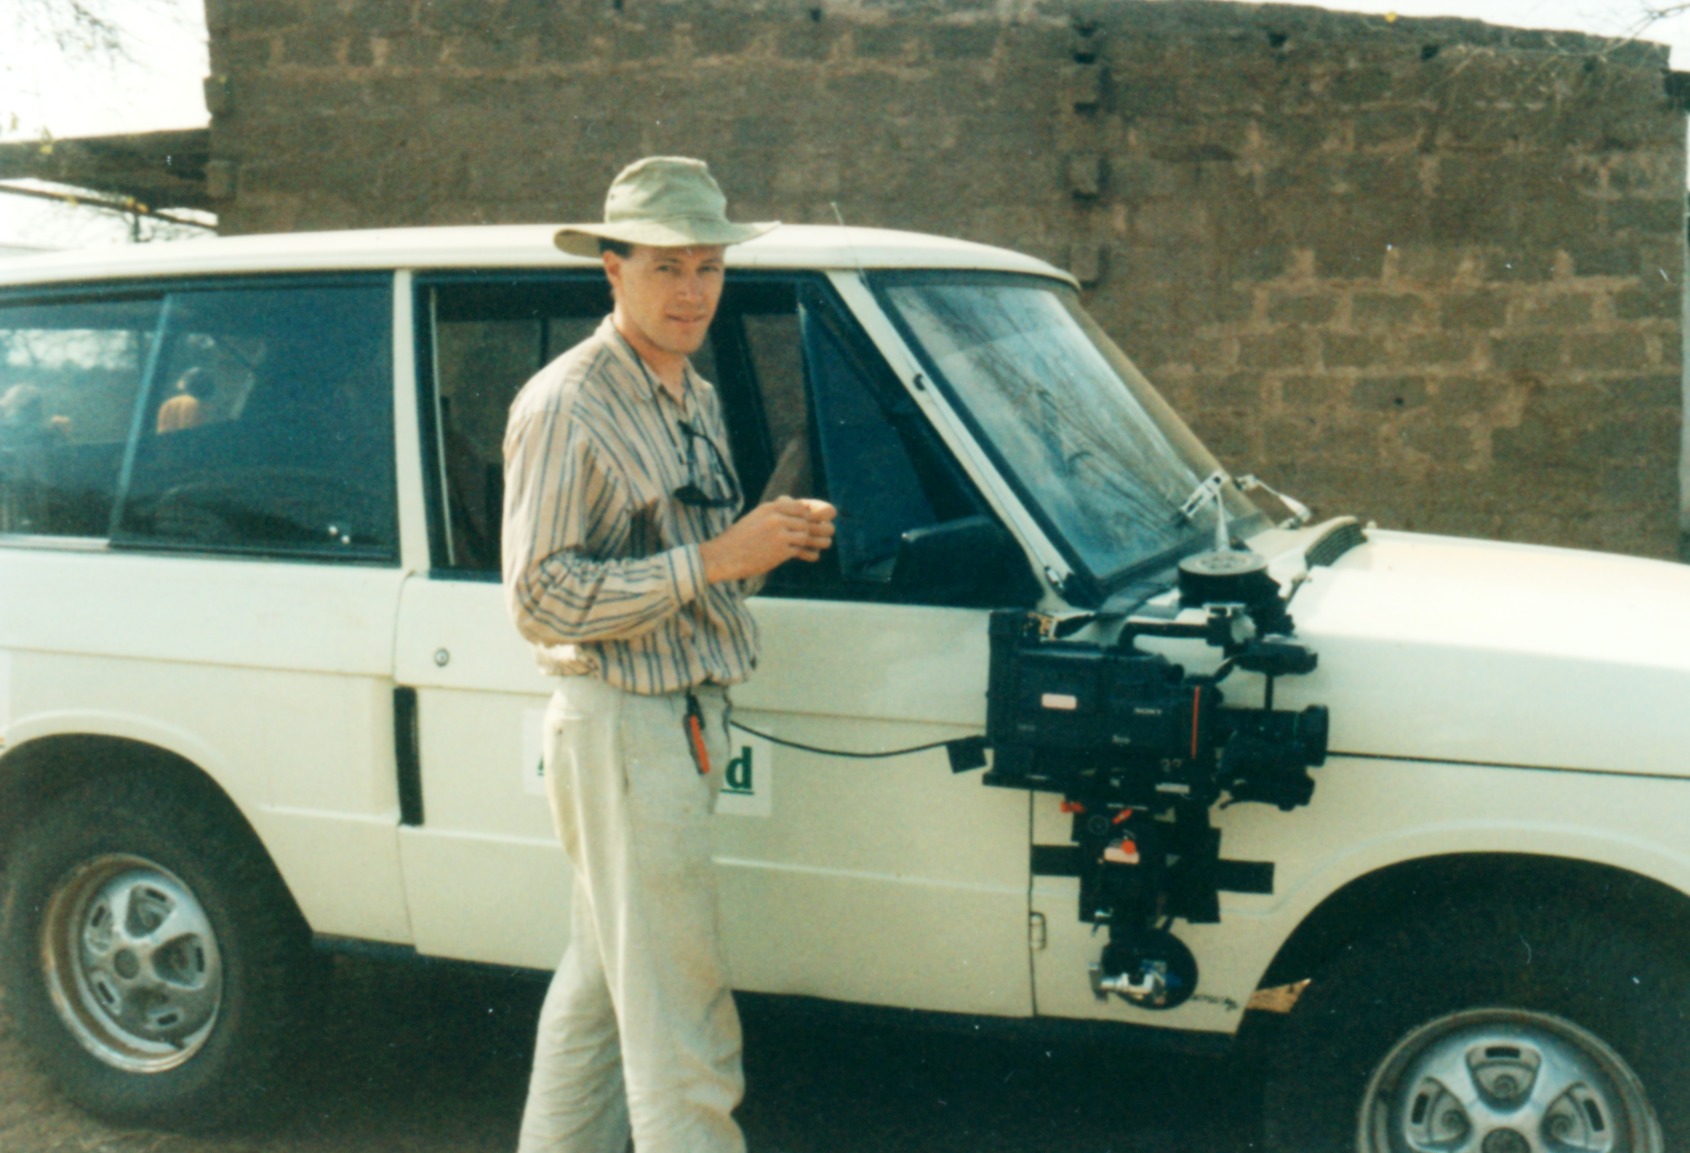 Philip Taylor as a young film Director in prepares for a travelling shot in Kenya